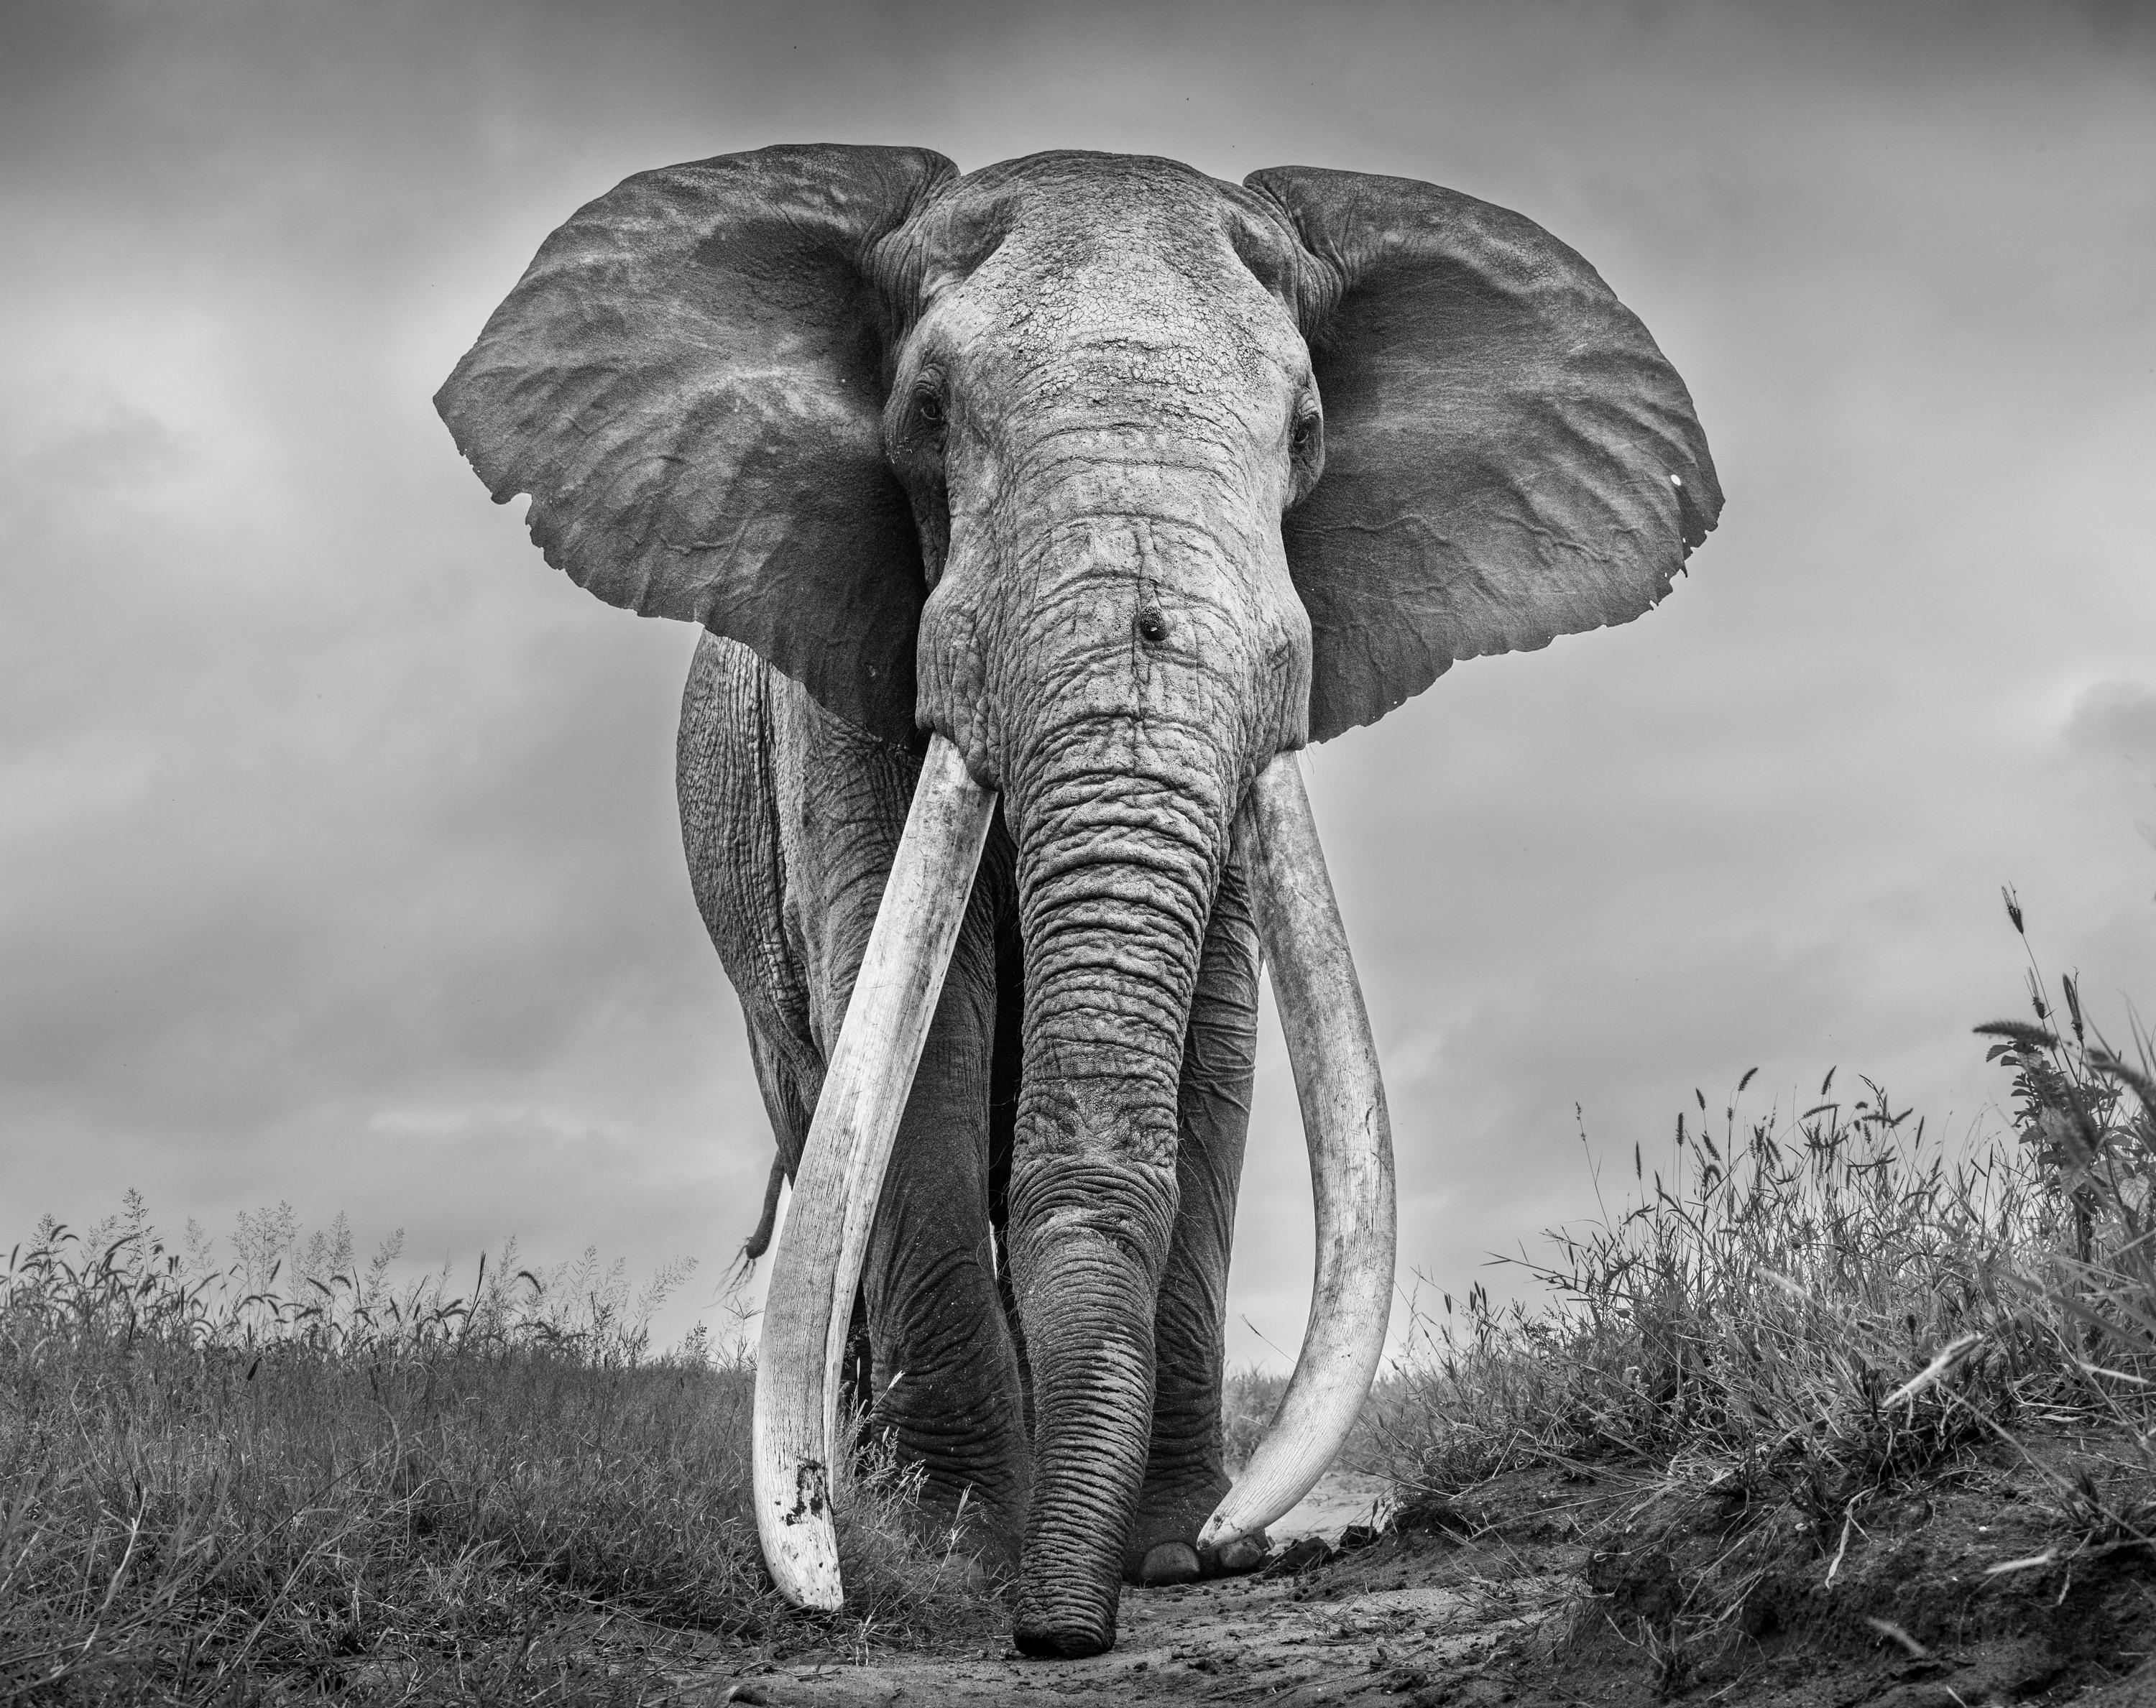 James Lewin - Towers of Ivory, Fotografie 2021, Nachdruck